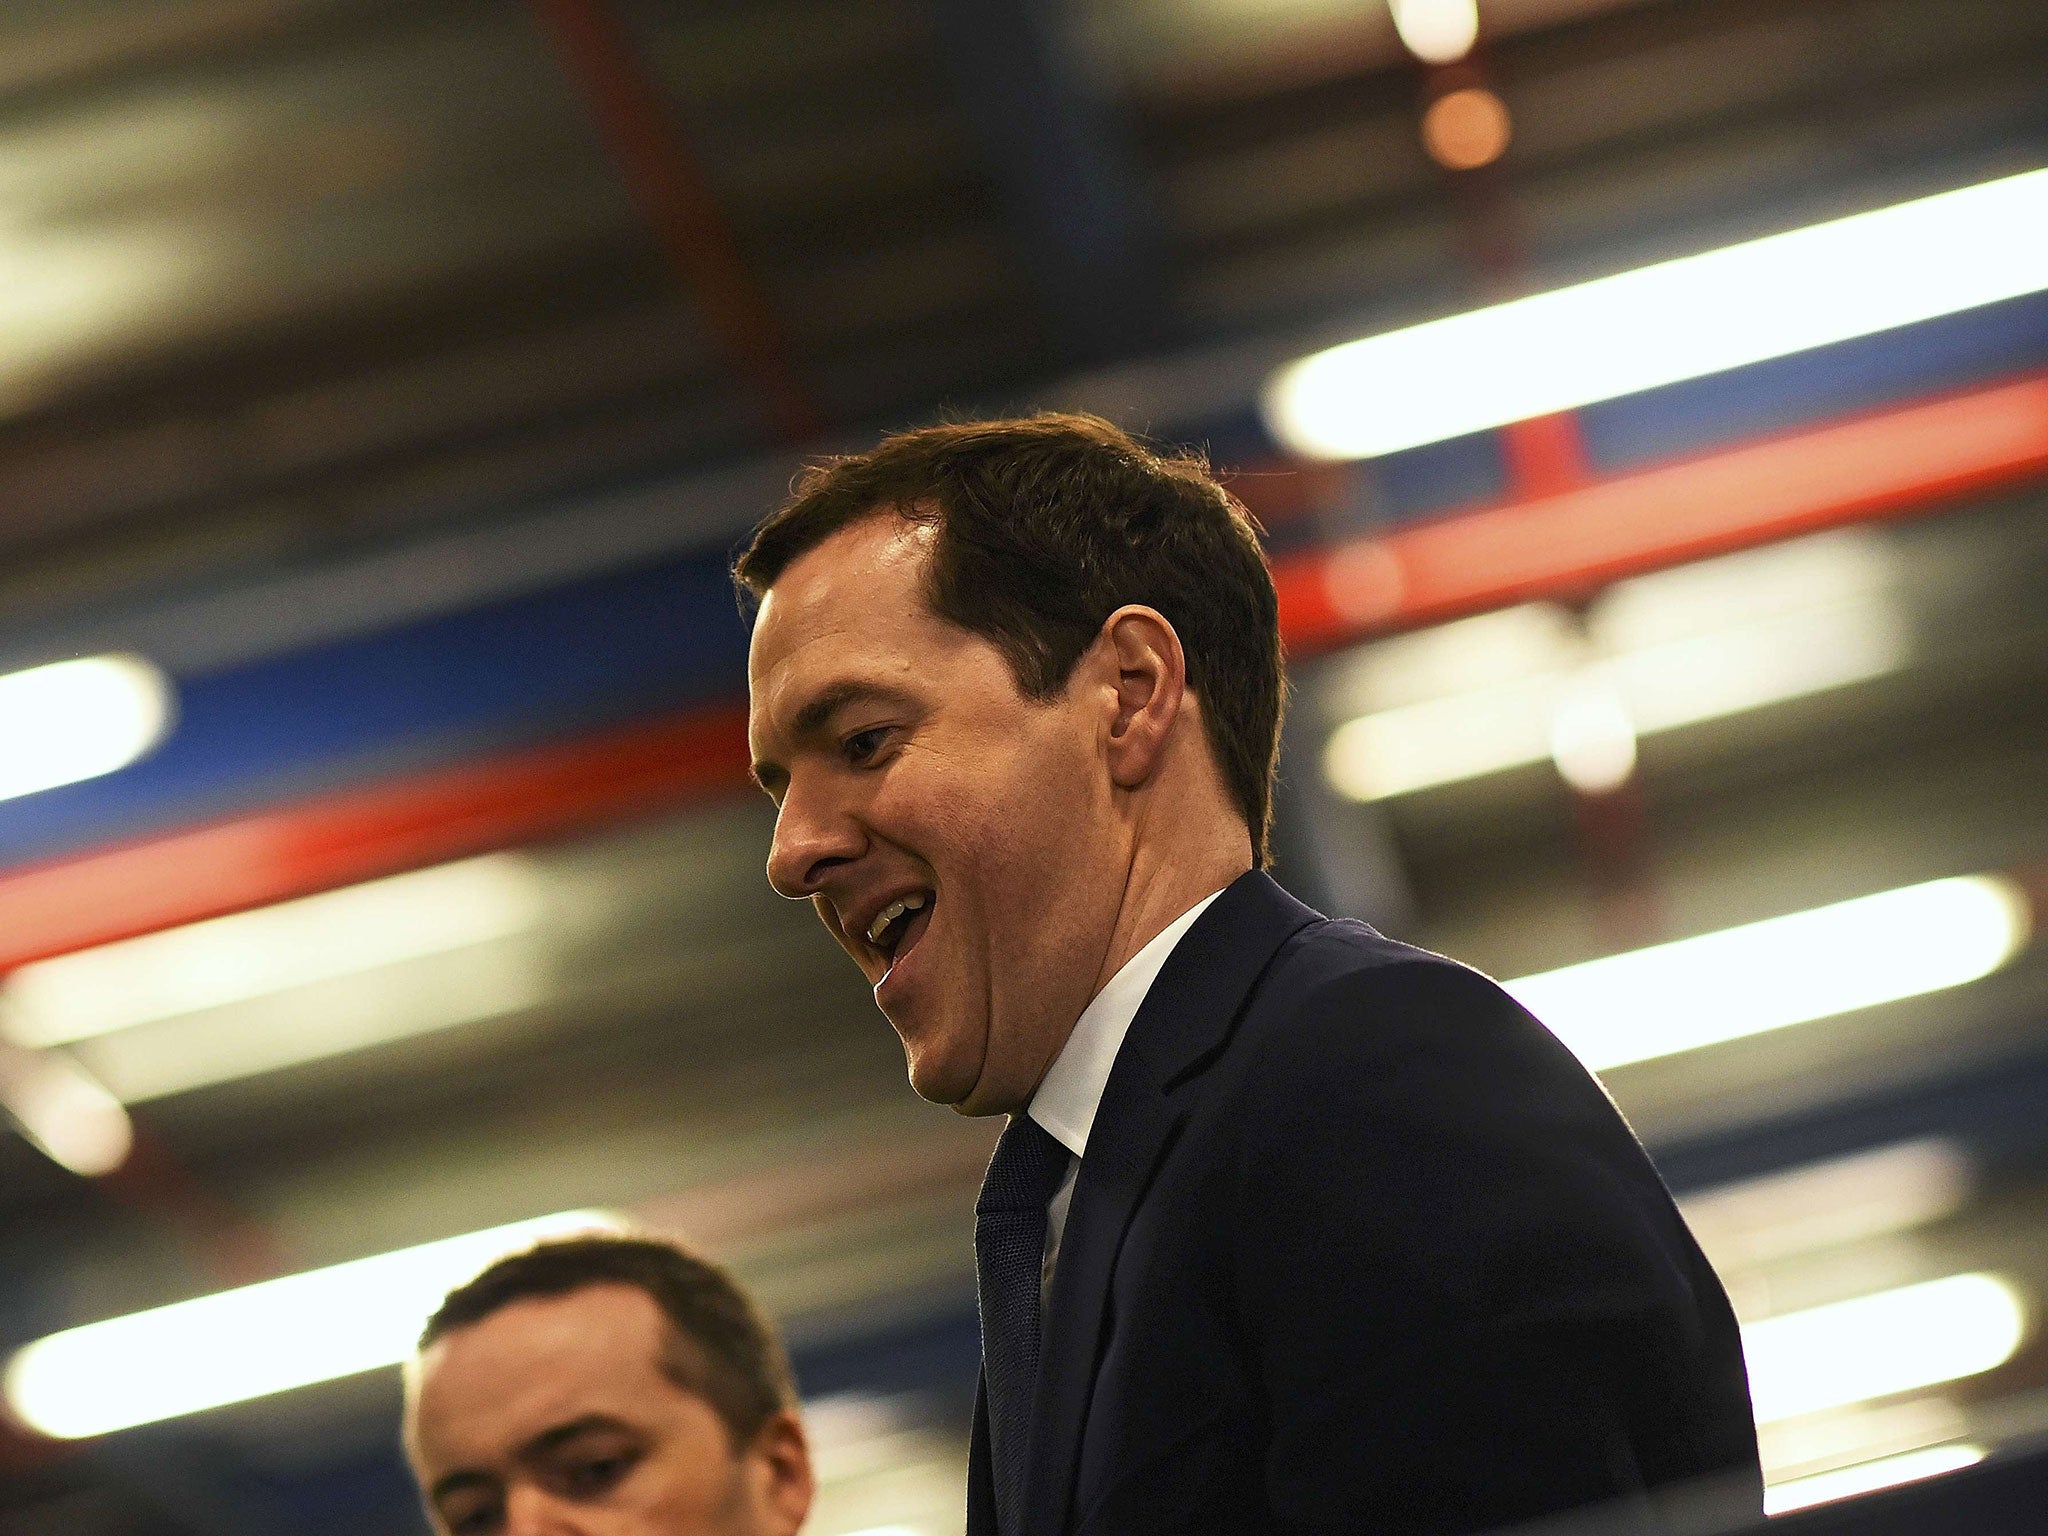 George Osborne checks food items during a visit to the Ocado Customer Fulfilment Centre in Hatfield, 6 April 2016